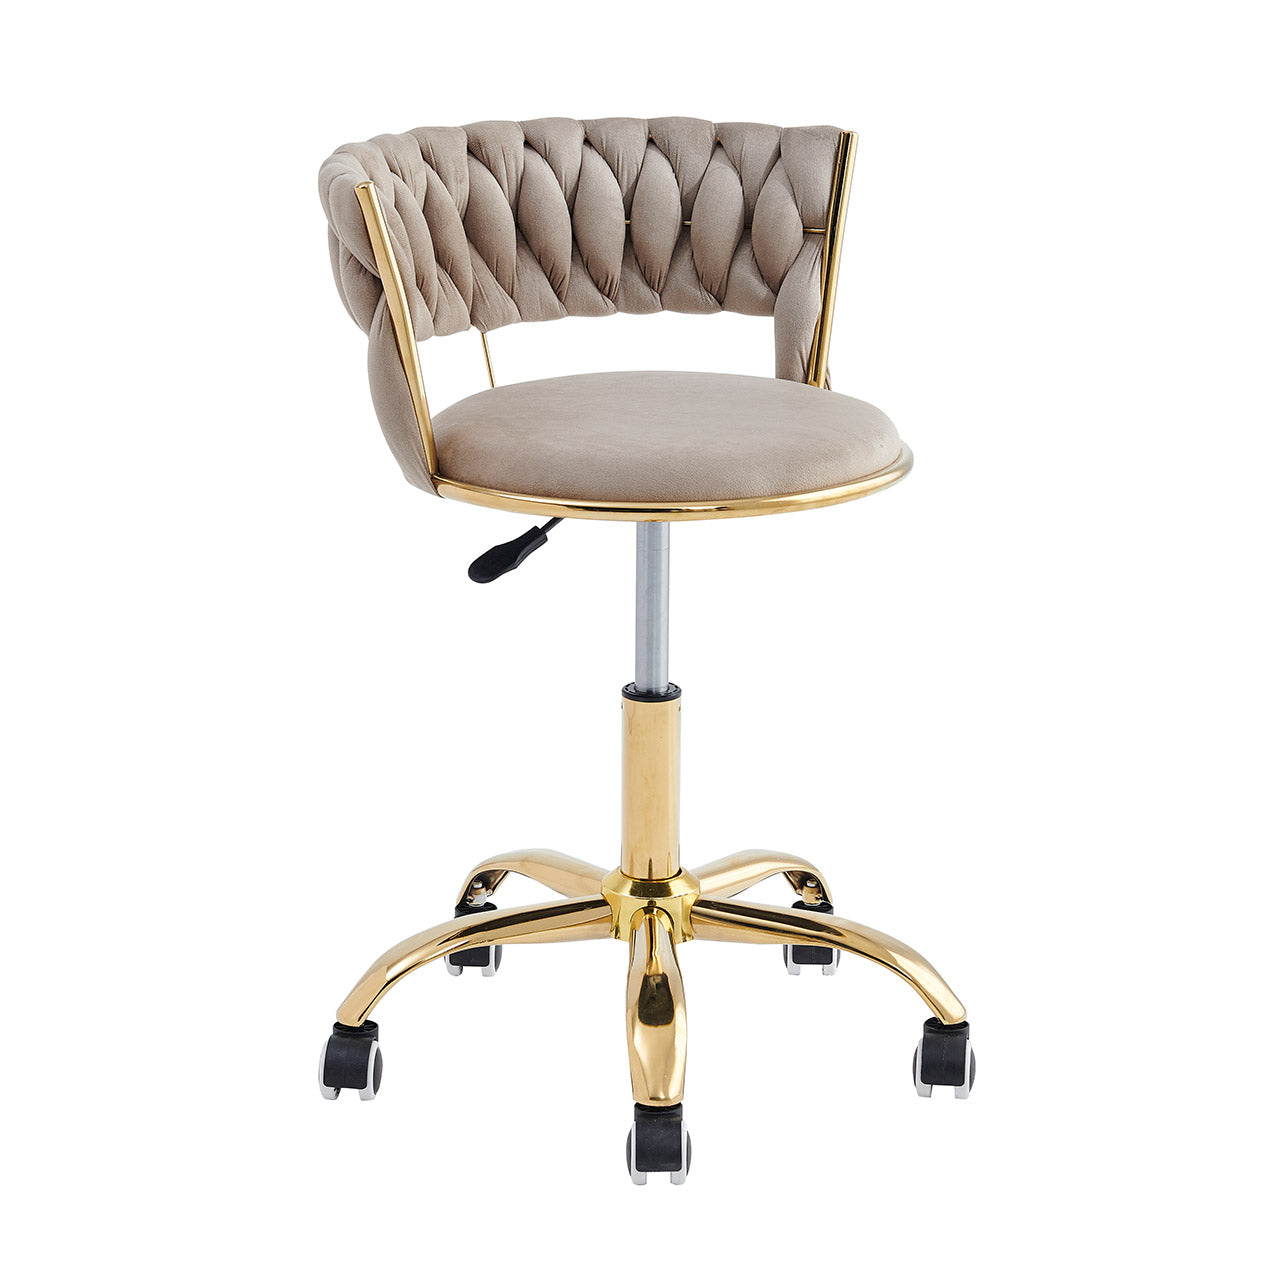 Stylish Gold Frame Bar Chair With Wheels – Available In 3 Colours